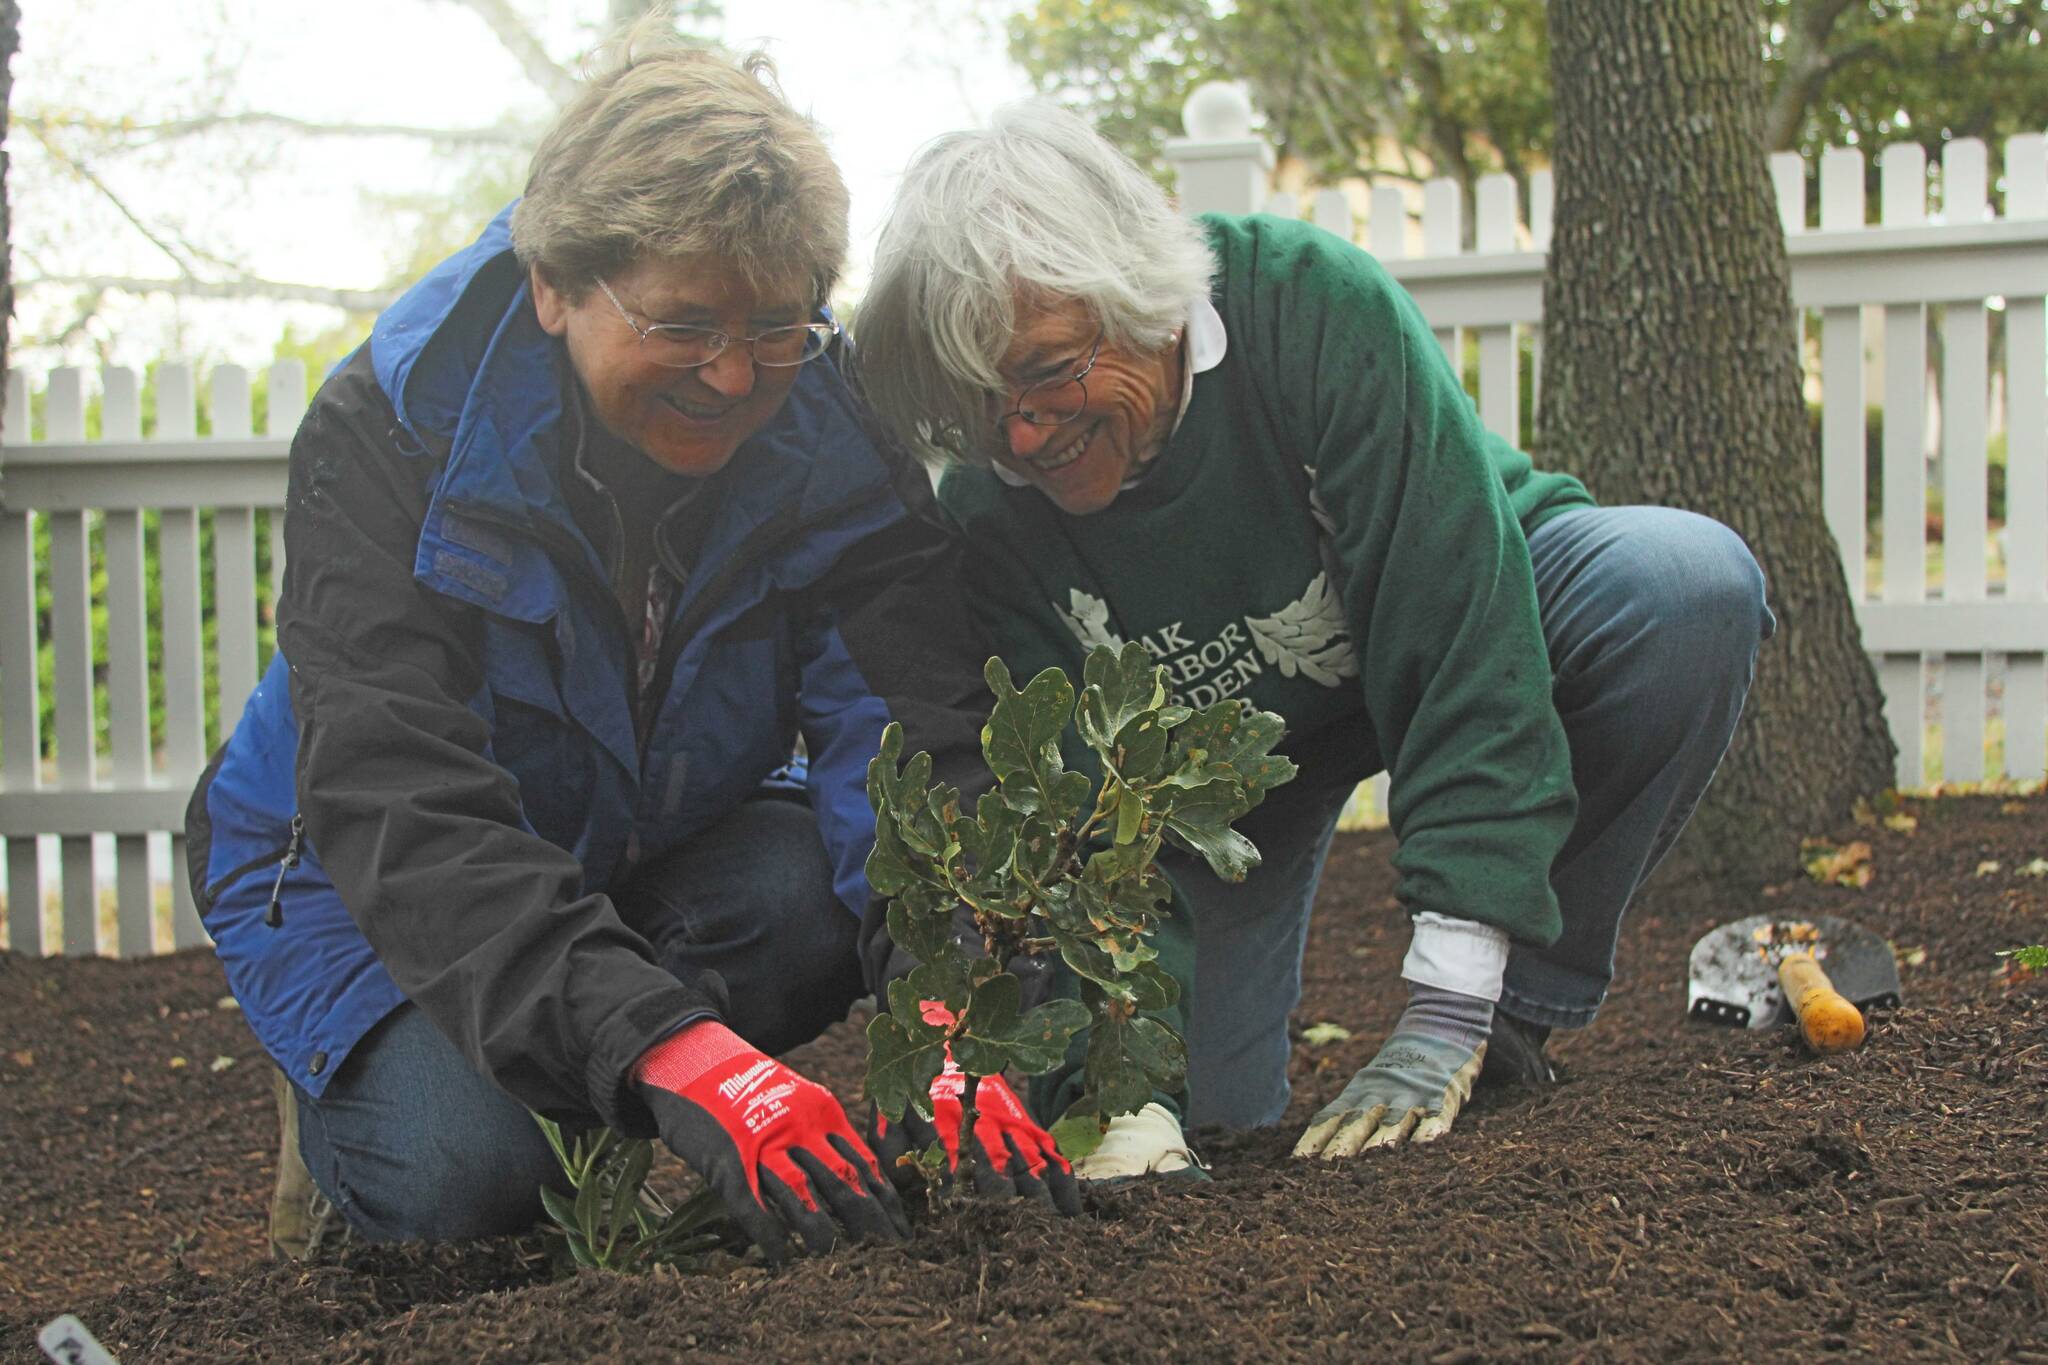 Oak Harbor Garden Club members Leah Hofer, left, and Kathy Harbour work on a gardening project in Smith Park. (Photo by Karina Andrew/Whidbey News-Times)